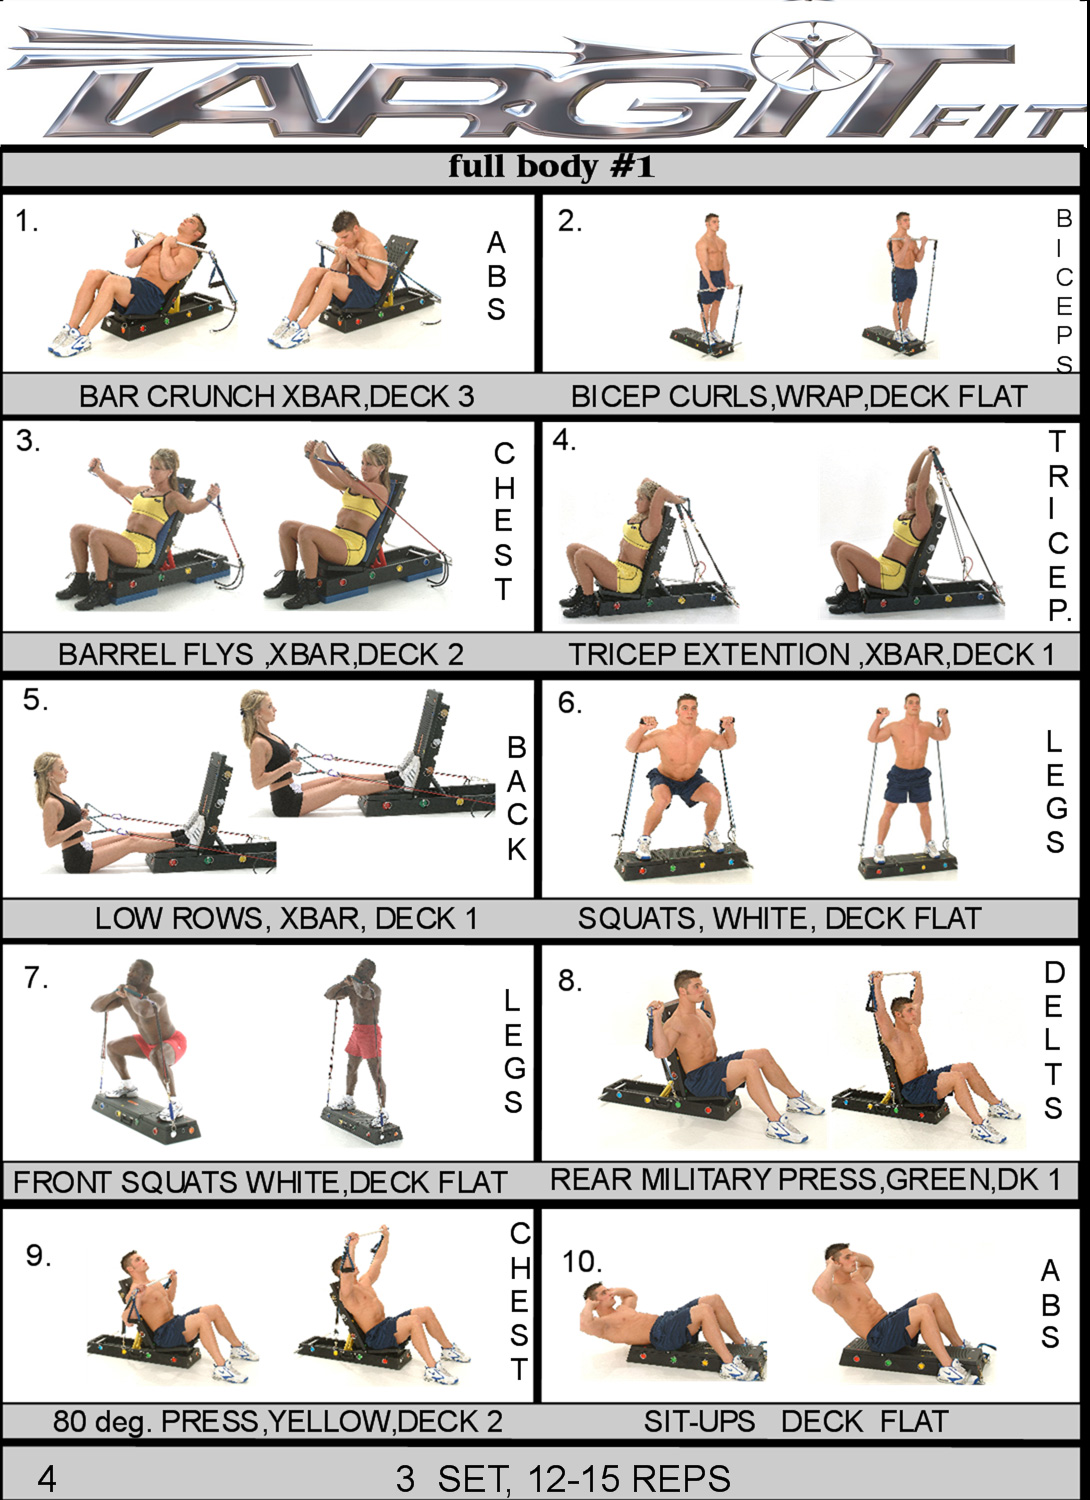 Gym Exercise Workout Chart